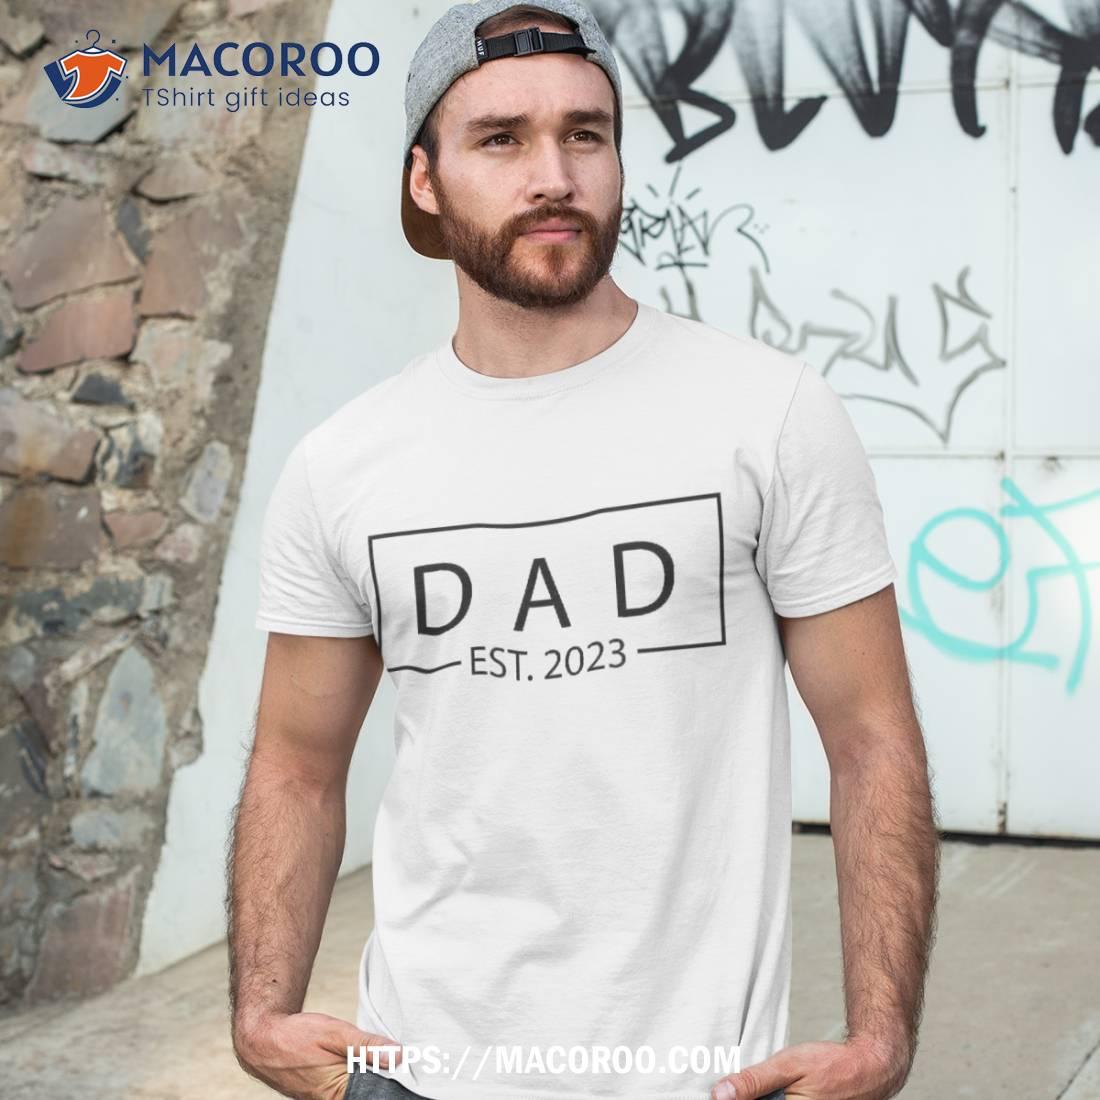 https://images.macoroo.com/wp-content/uploads/2023/08/dad-est-2023-promoted-to-father-first-father-s-day-shirt-gift-ideas-for-older-dad-tshirt-3.jpg